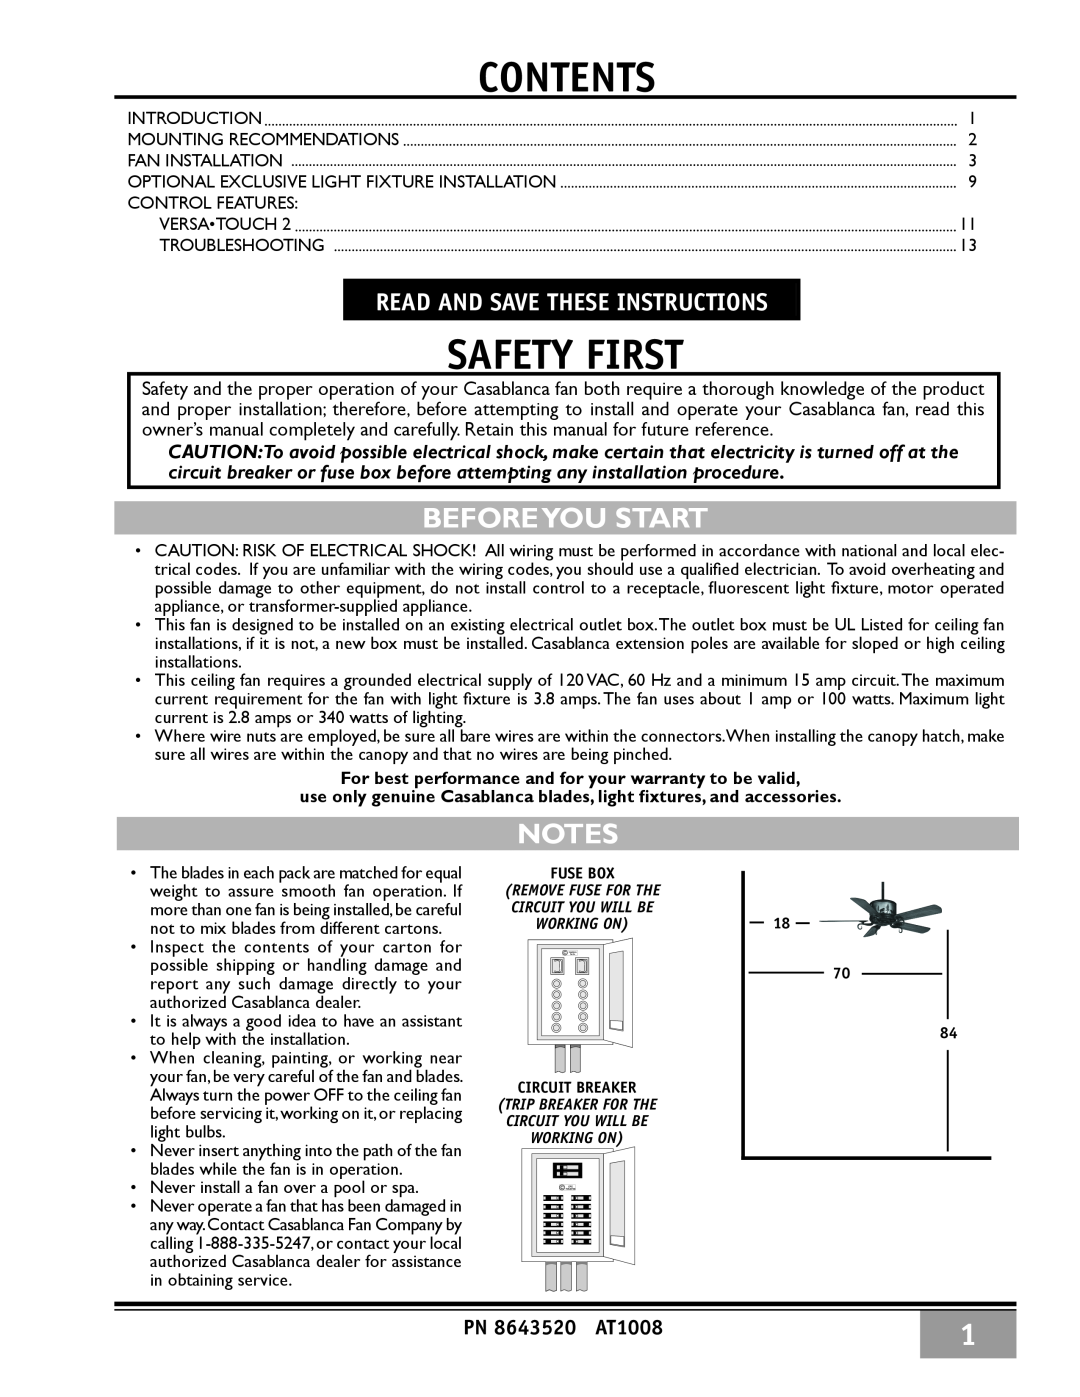 Casablanca Fan Company 86UxxM owner manual Beforeyou Start, Read And Save These Instructions, Contents, Safety First 